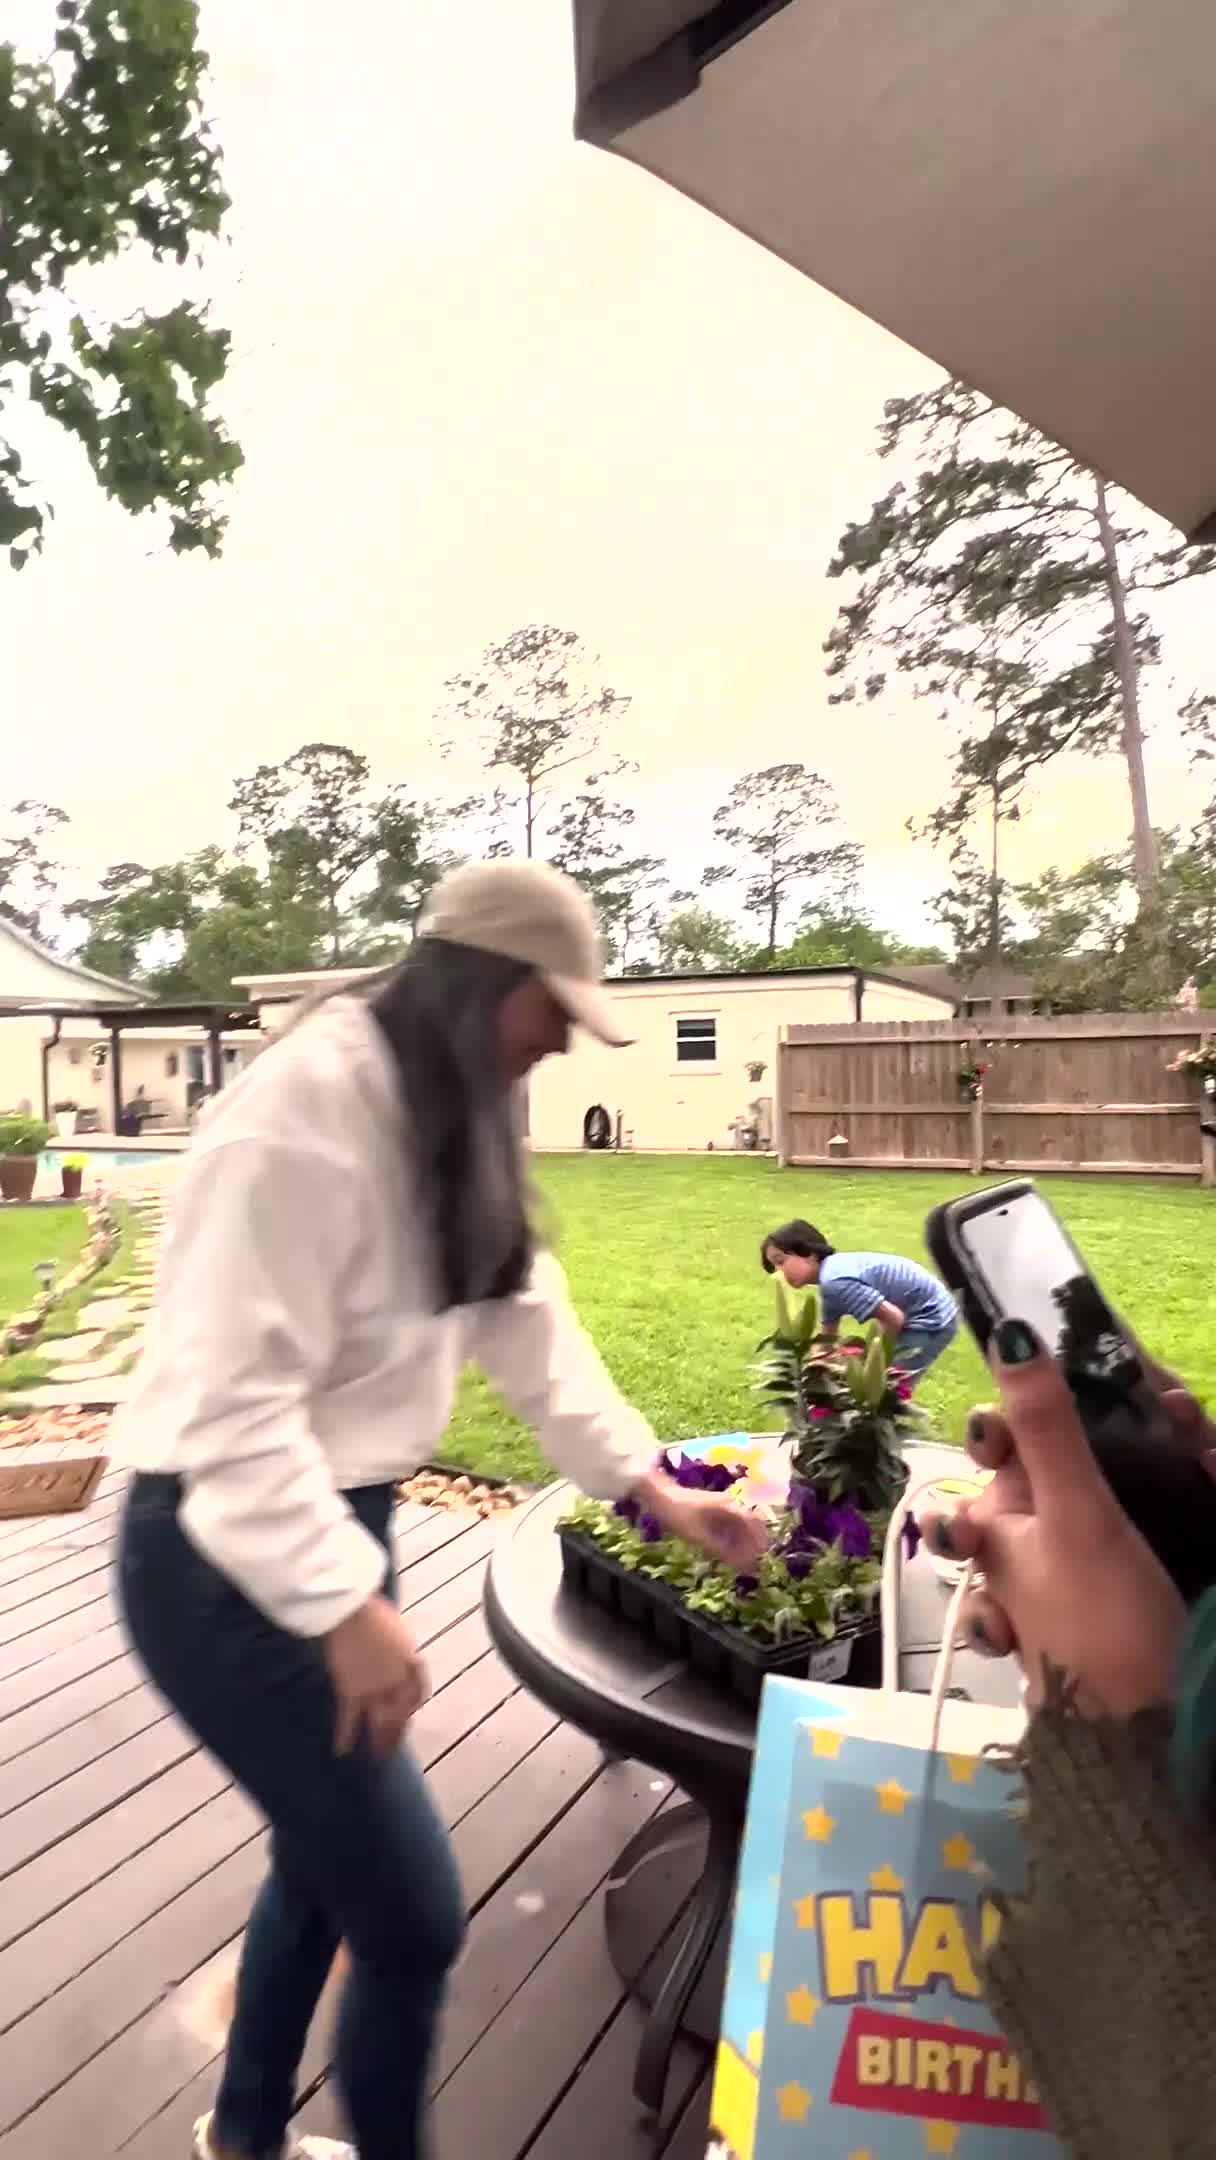 Guy at Party Hits Flower Pot Instead of Pinata